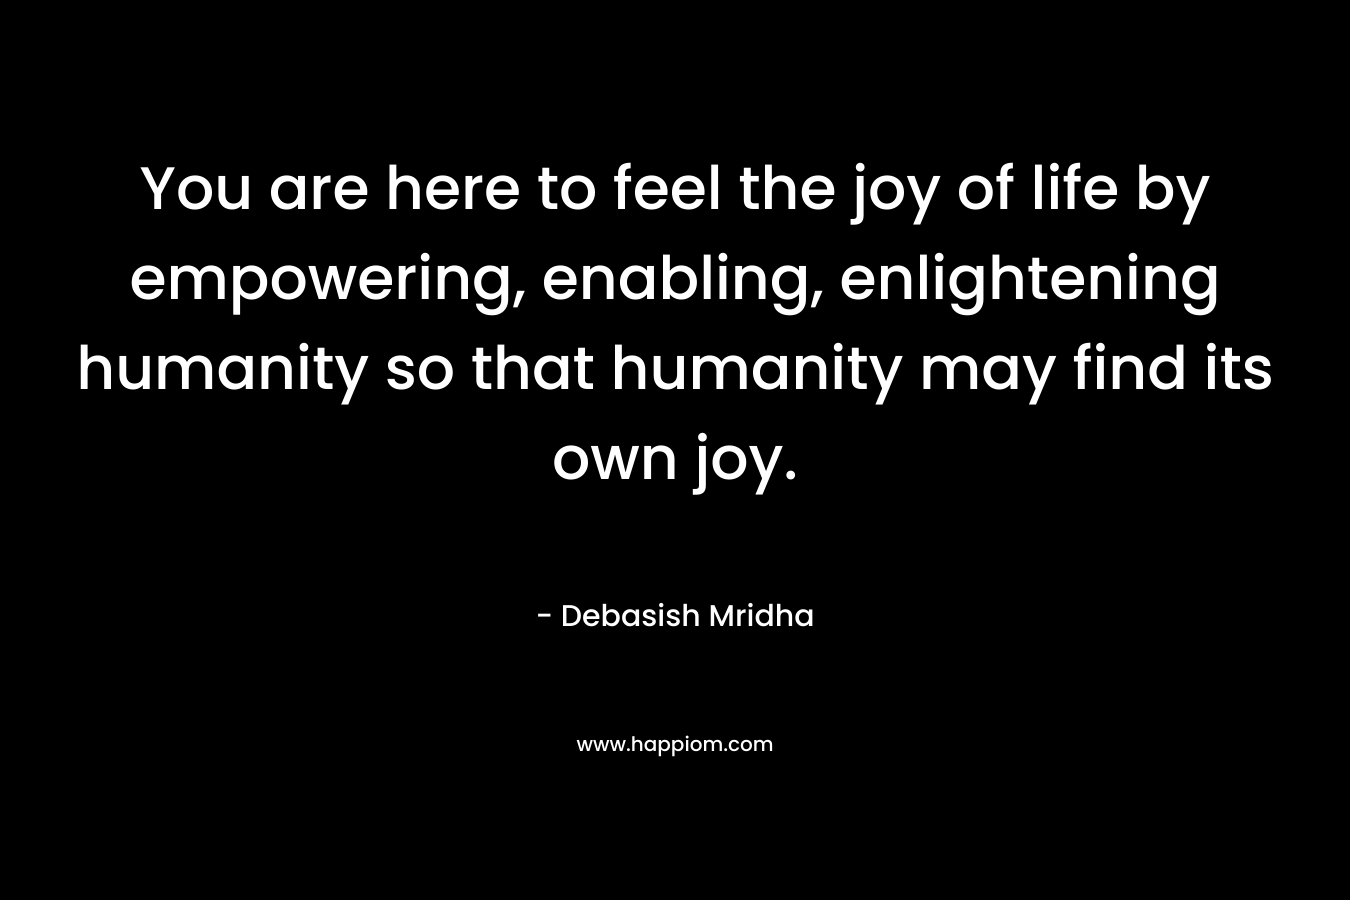 You are here to feel the joy of life by empowering, enabling, enlightening humanity so that humanity may find its own joy. – Debasish Mridha